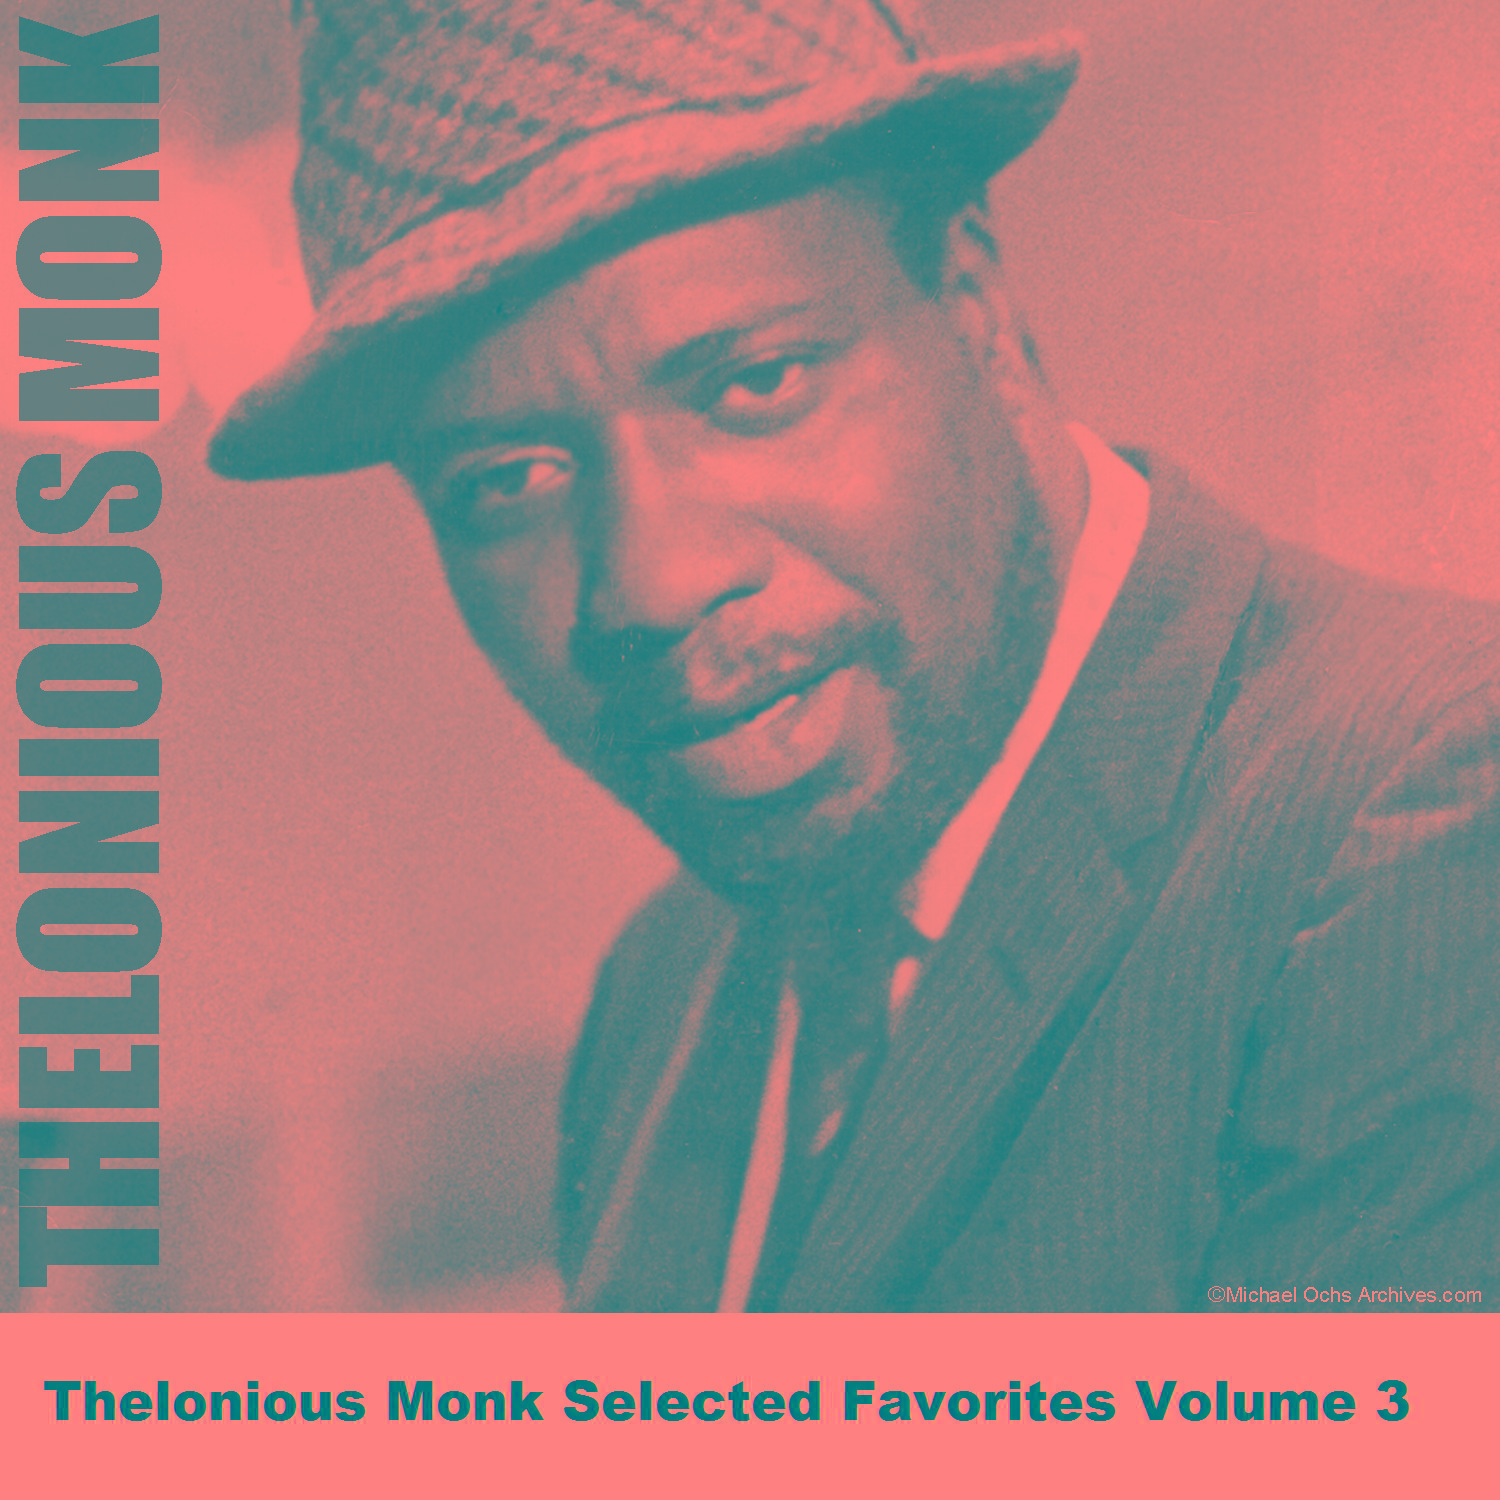 Thelonious Monk Selected Favorites Volume 3